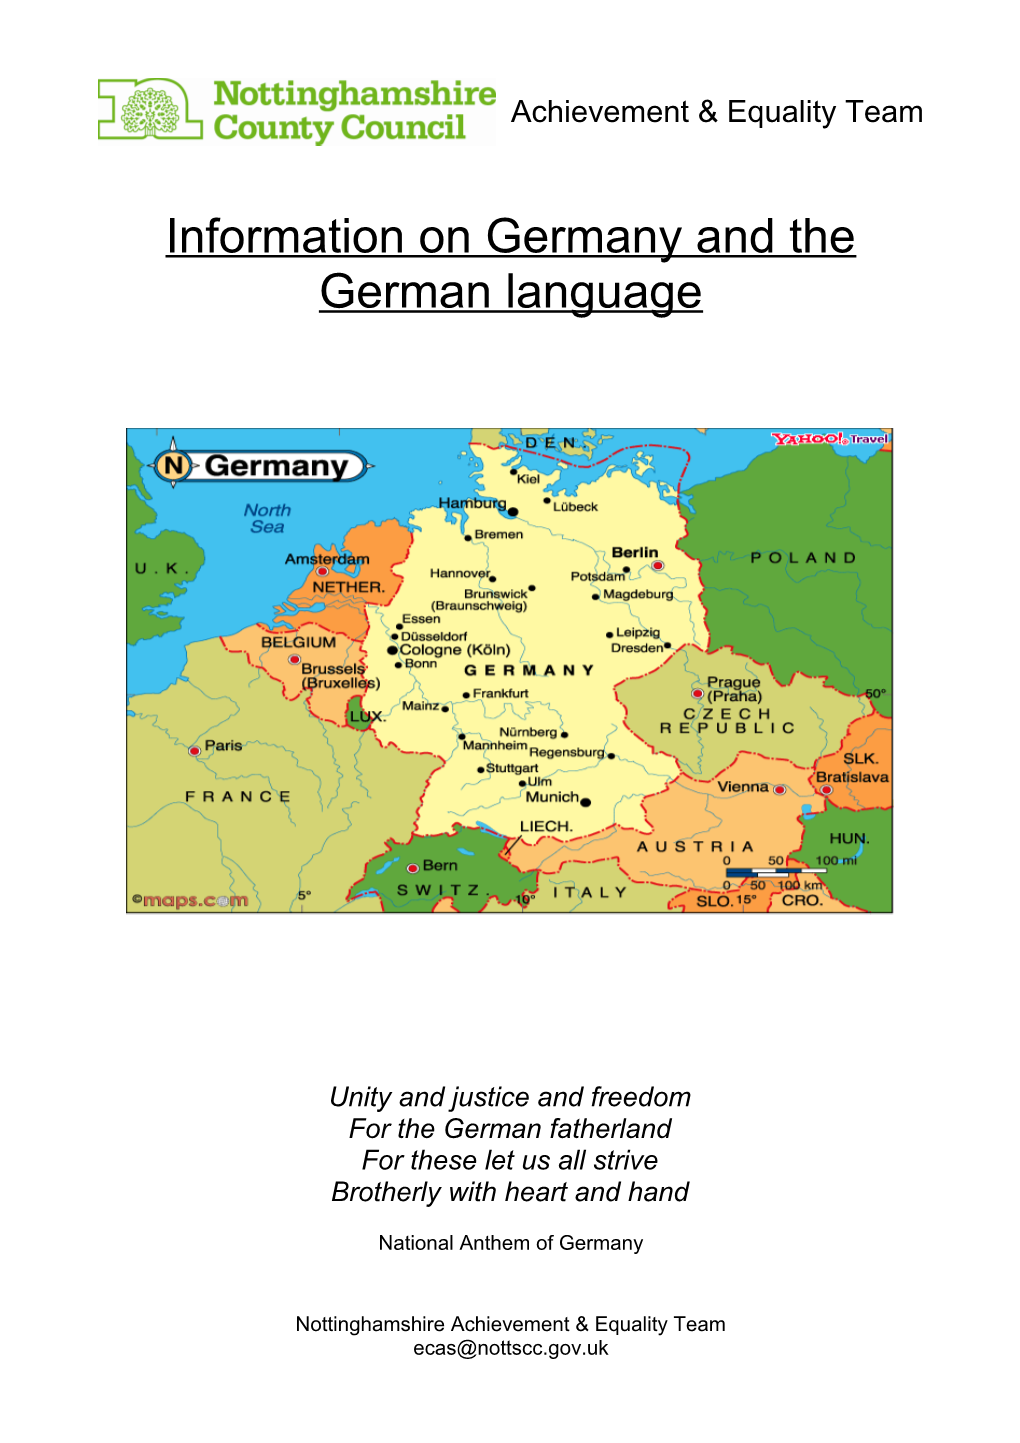 Information on Germany and the German Language